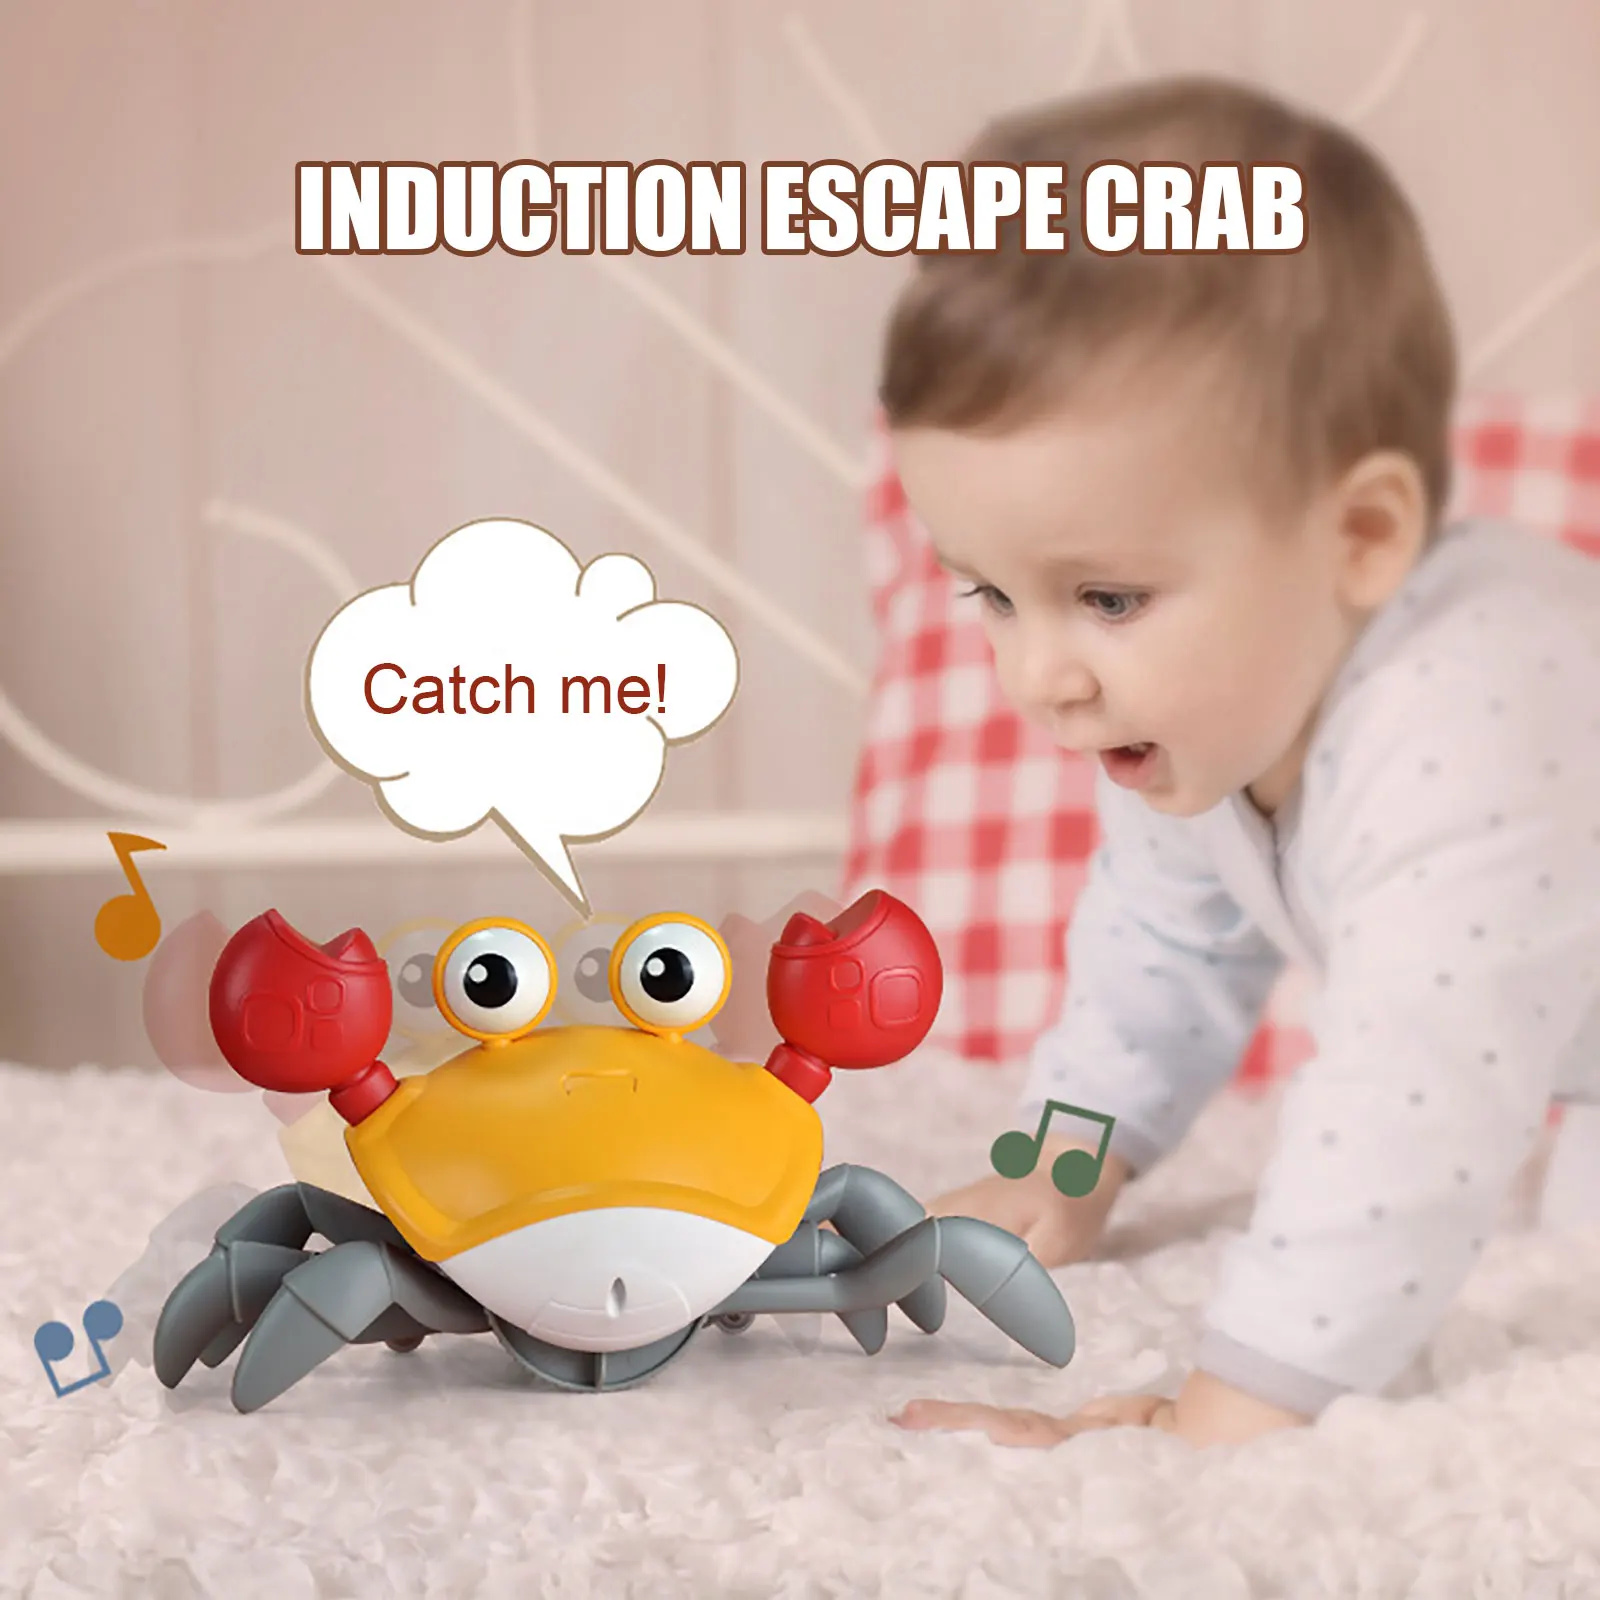 

Crawling Crab Baby Toy Music and LED Light Up Kids Toddler Interactive Learning Development Automatically Avoid Obstacles